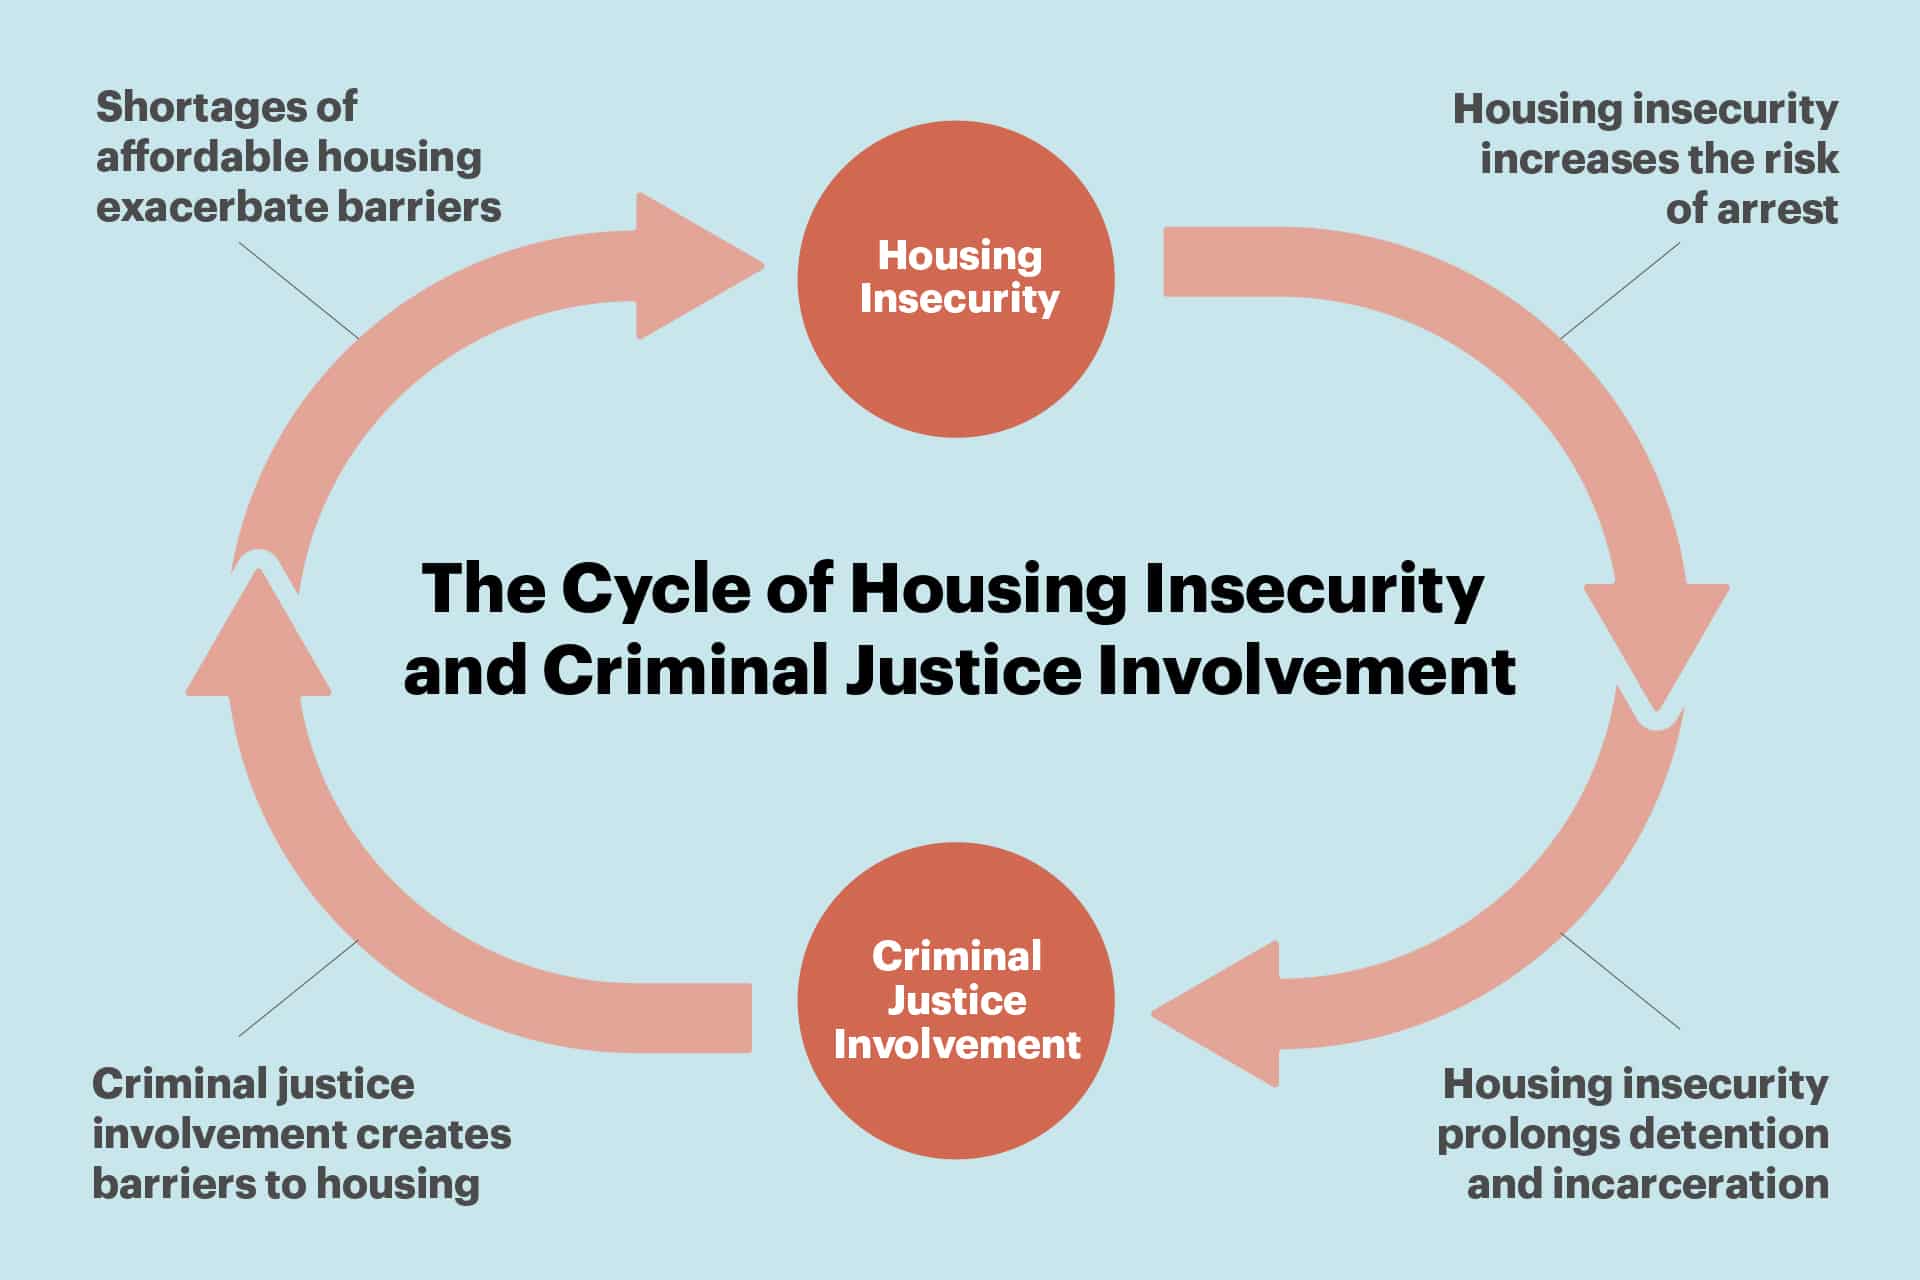 The cycle of housing insecurity and criminal justice involvement